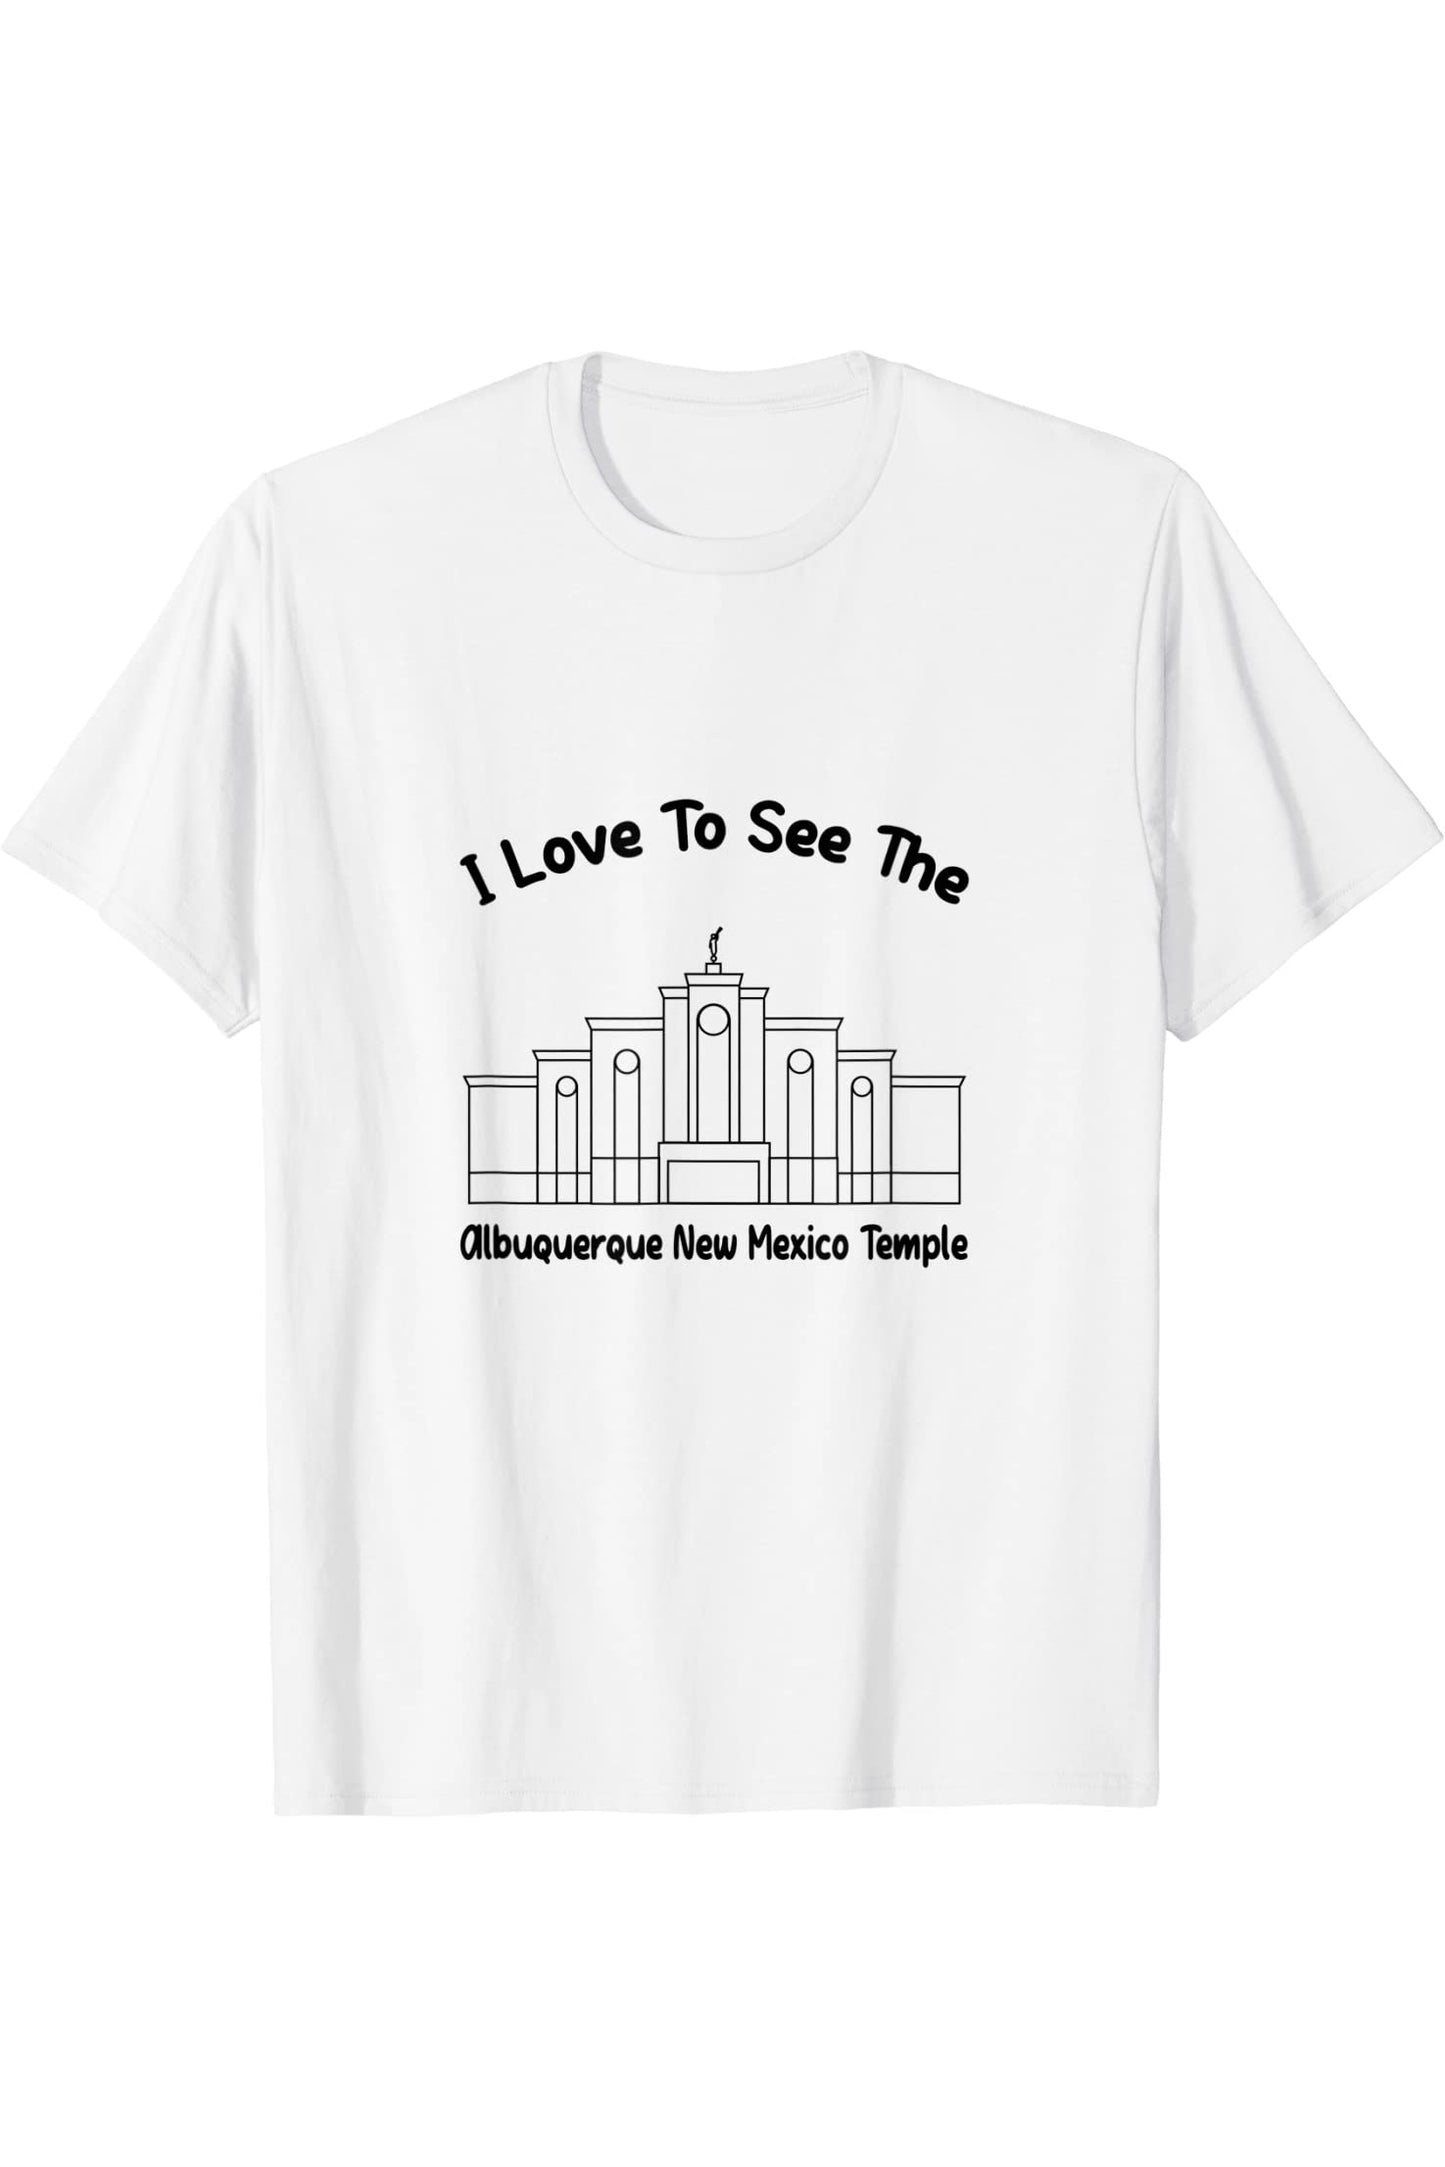 Albuquerque New Mexico Temple T-Shirt - Primary Style (English) US